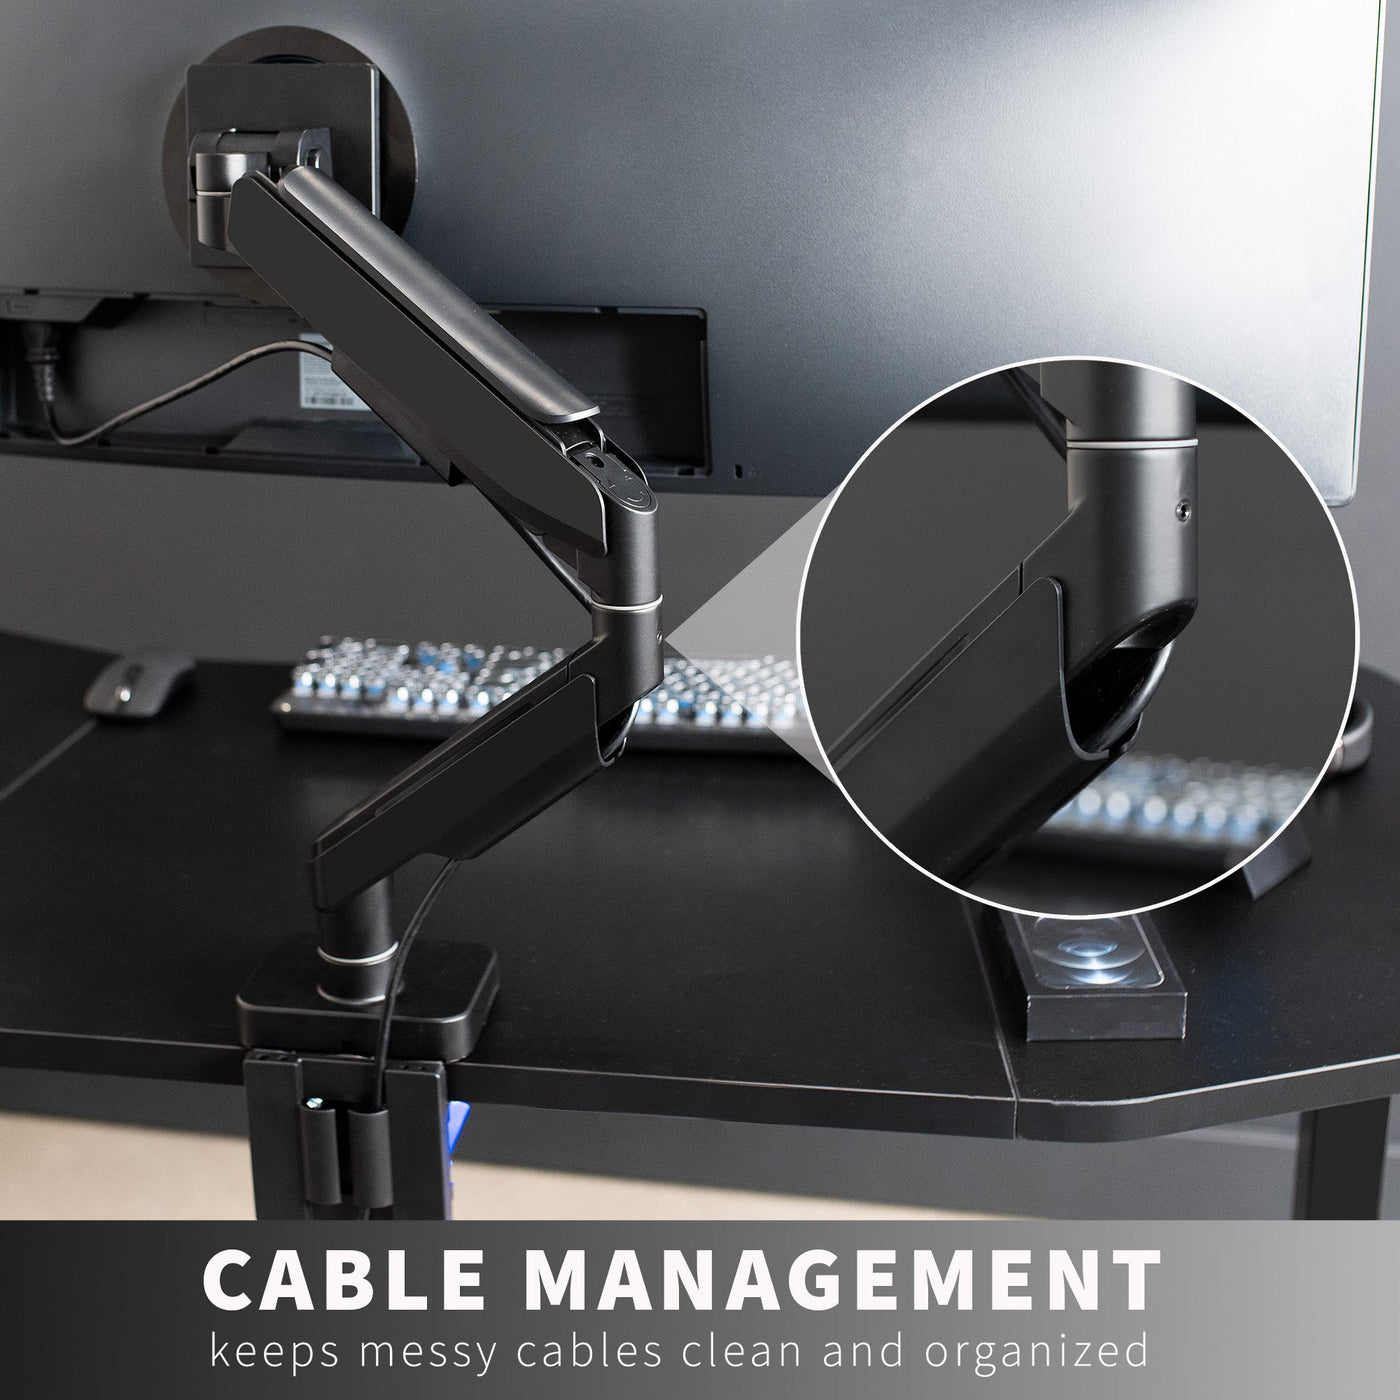  The ultimate ultrawide mount for gamers and content creators alike, this premium stand perfectly counterbalances the weight of your 17” to 49” monitor (up to 44 lbs) for optimal ergonomic positioning. 